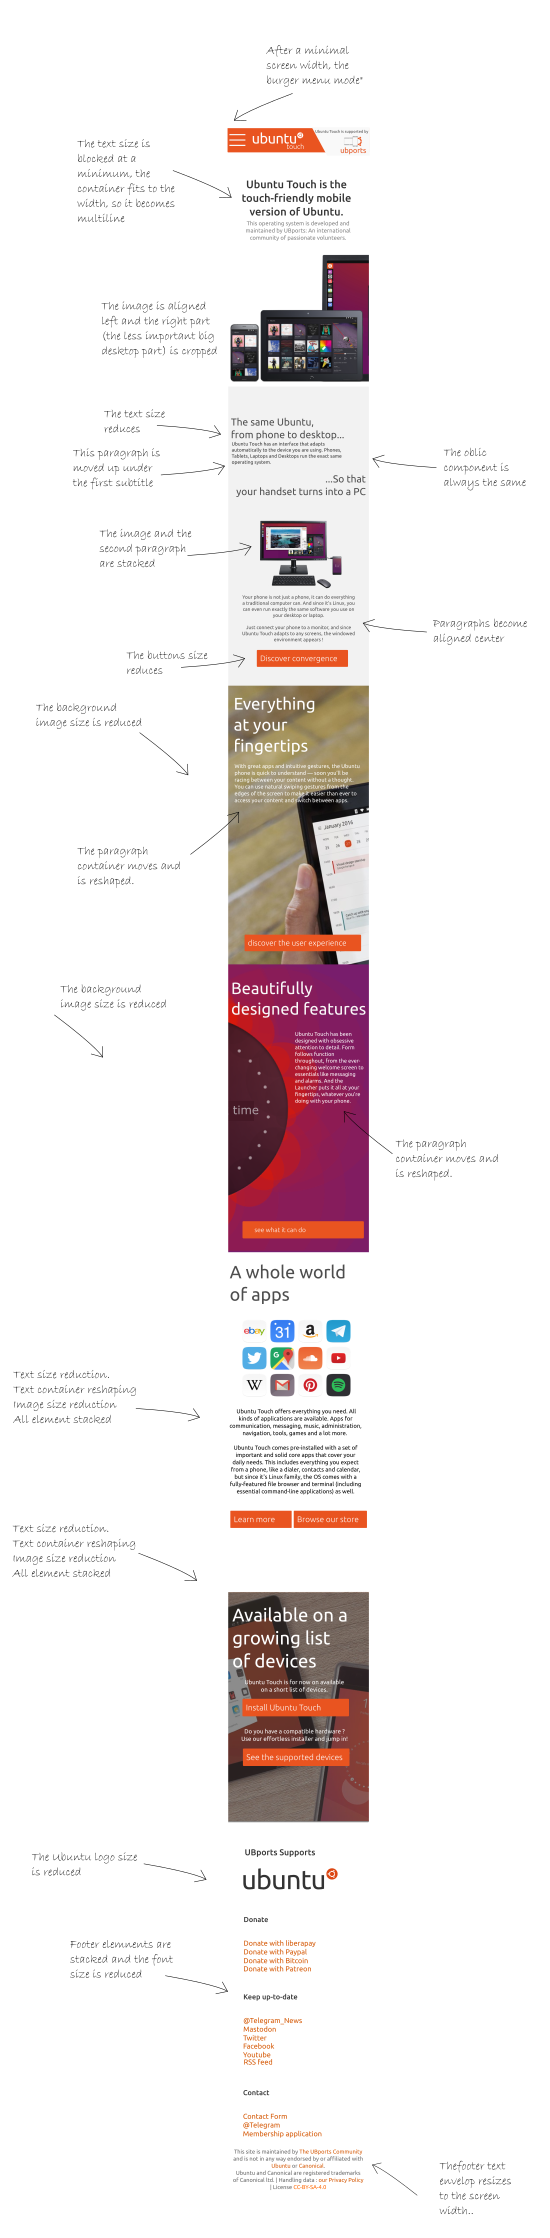 ubuntutouch_phone_size.png